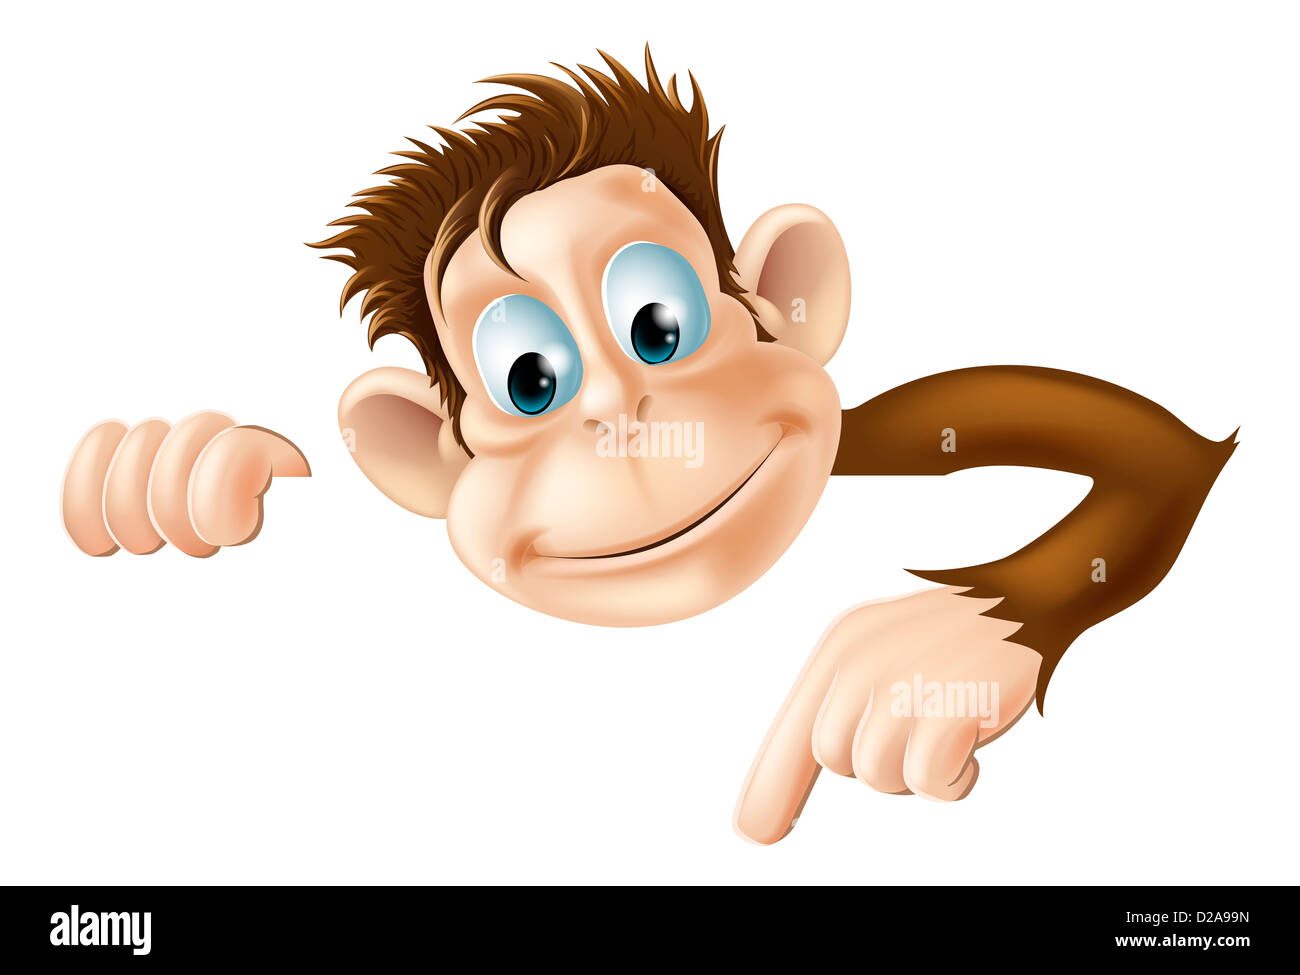 An illustration of a cute cartoon monkey peeking round from behind a ...